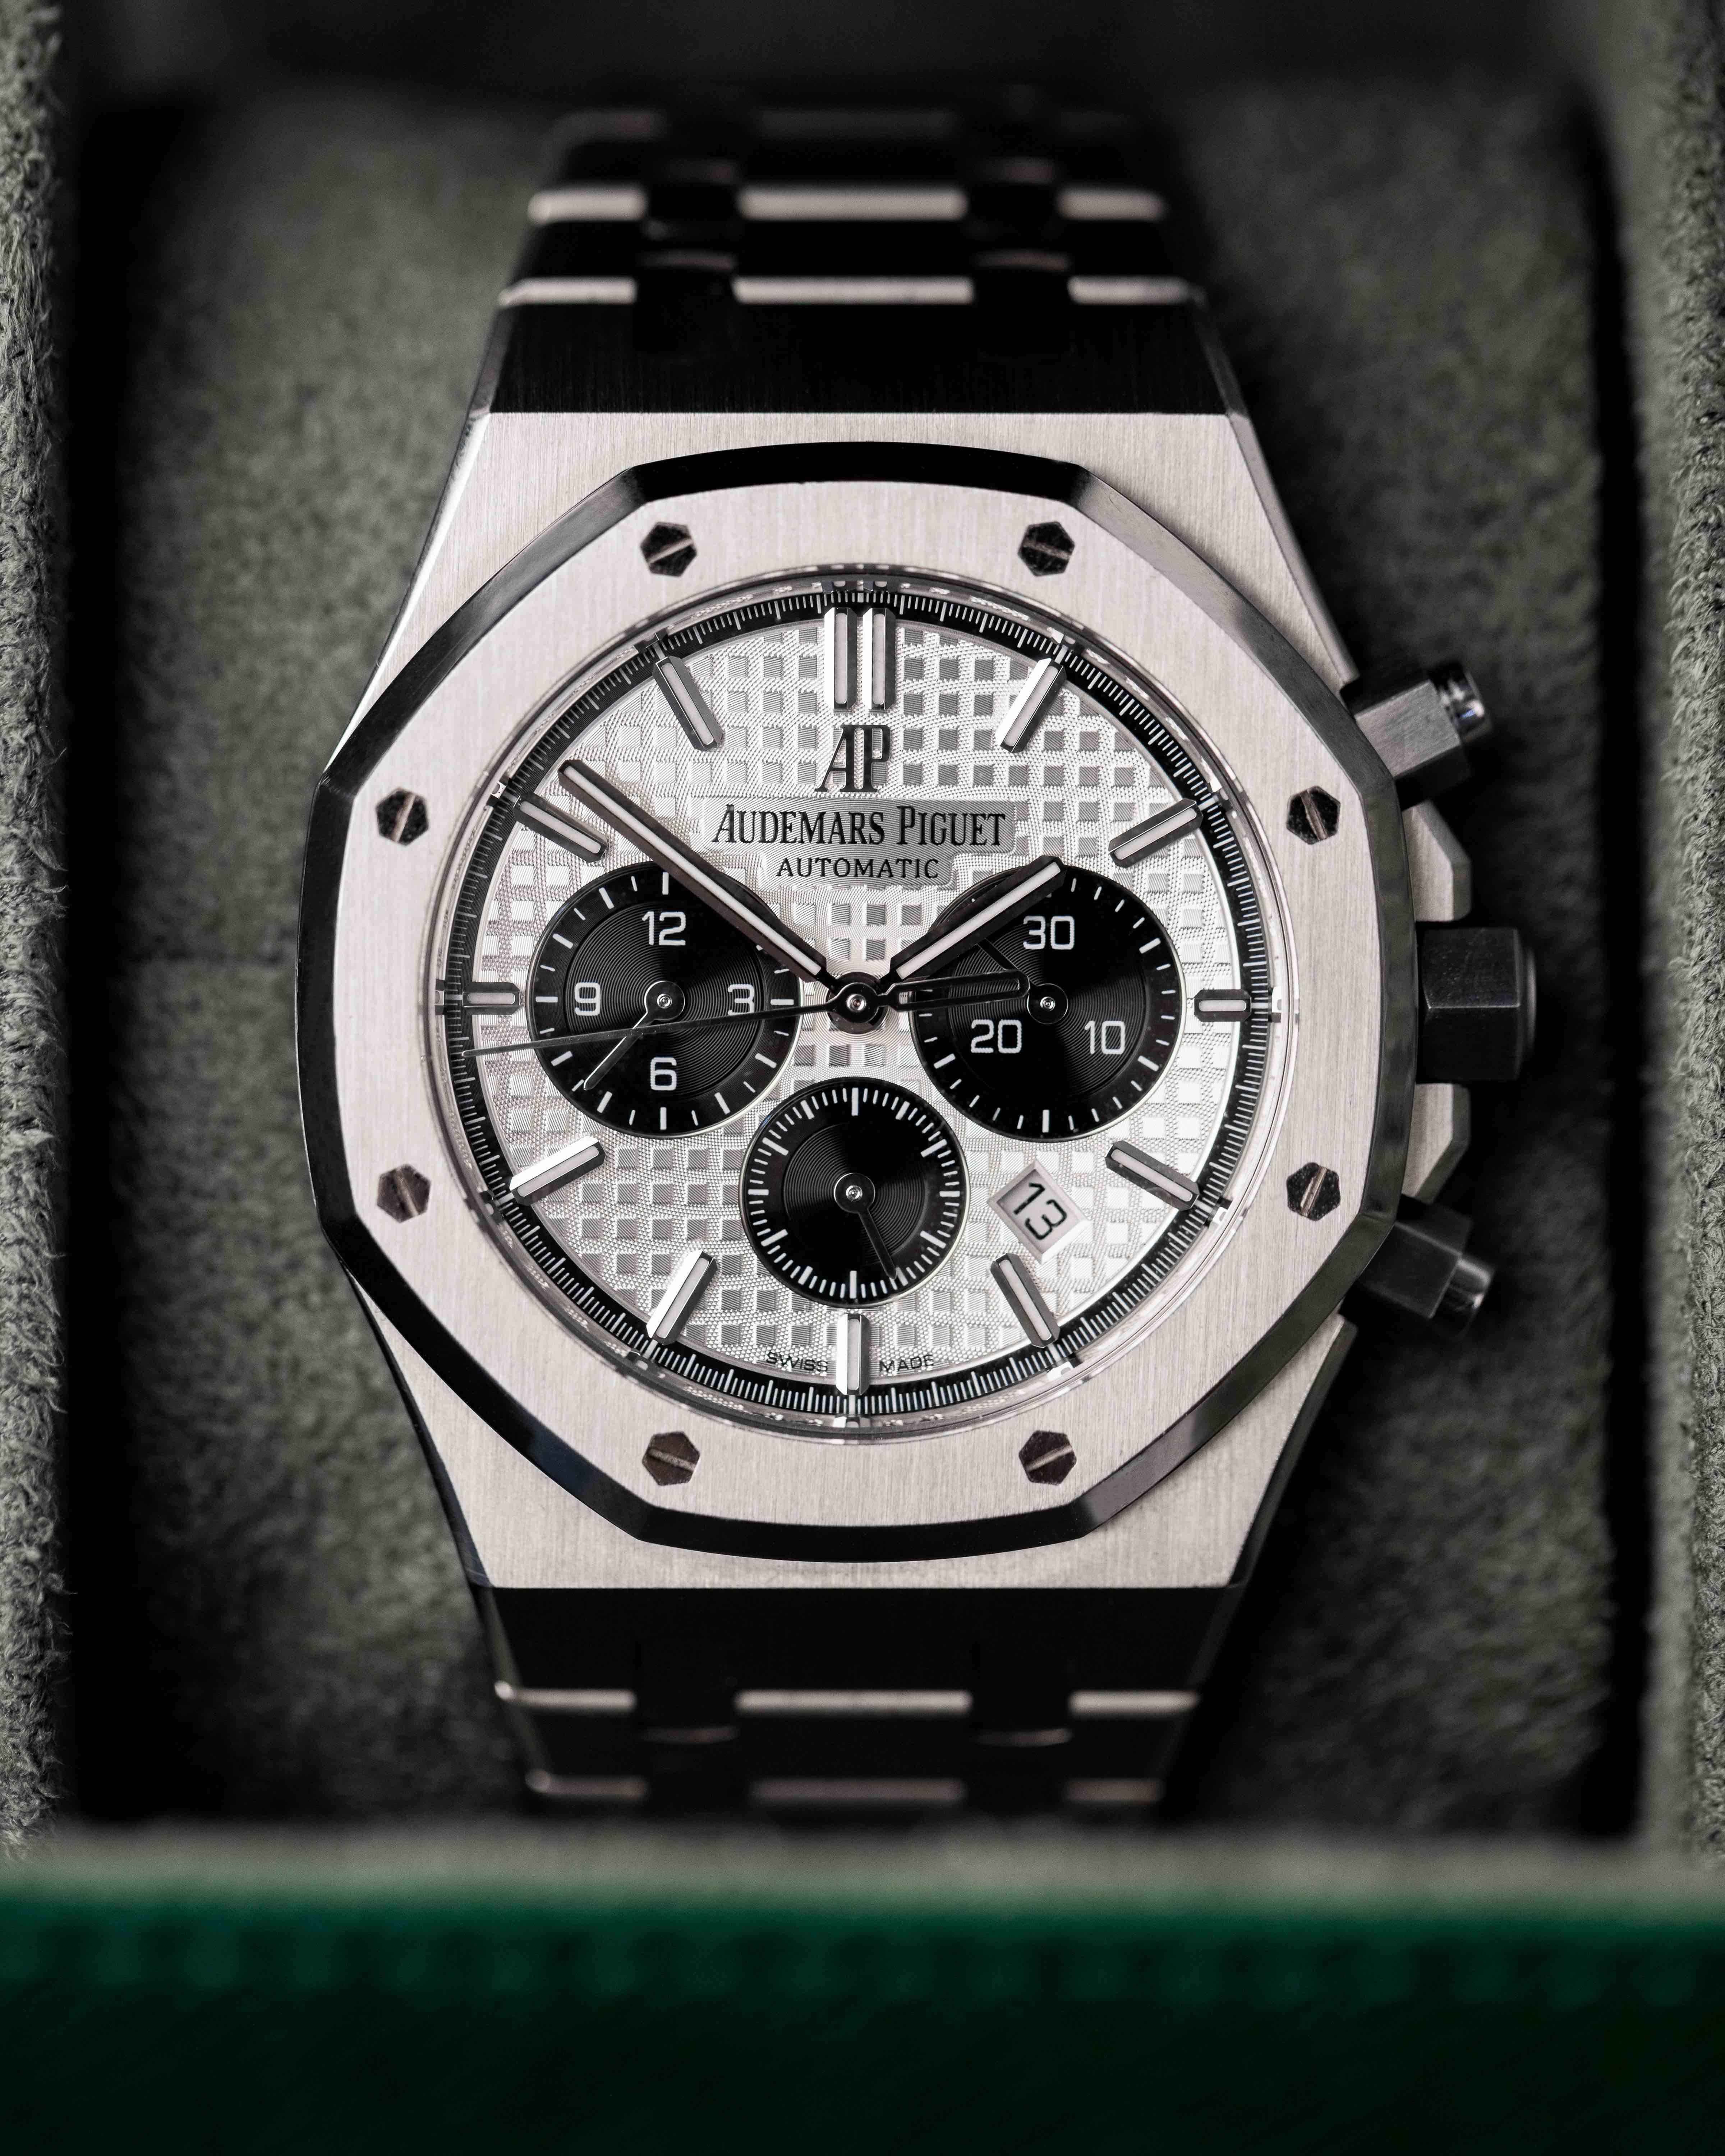 Your Complete Guide to Audemars Piguet Watch Nicknames